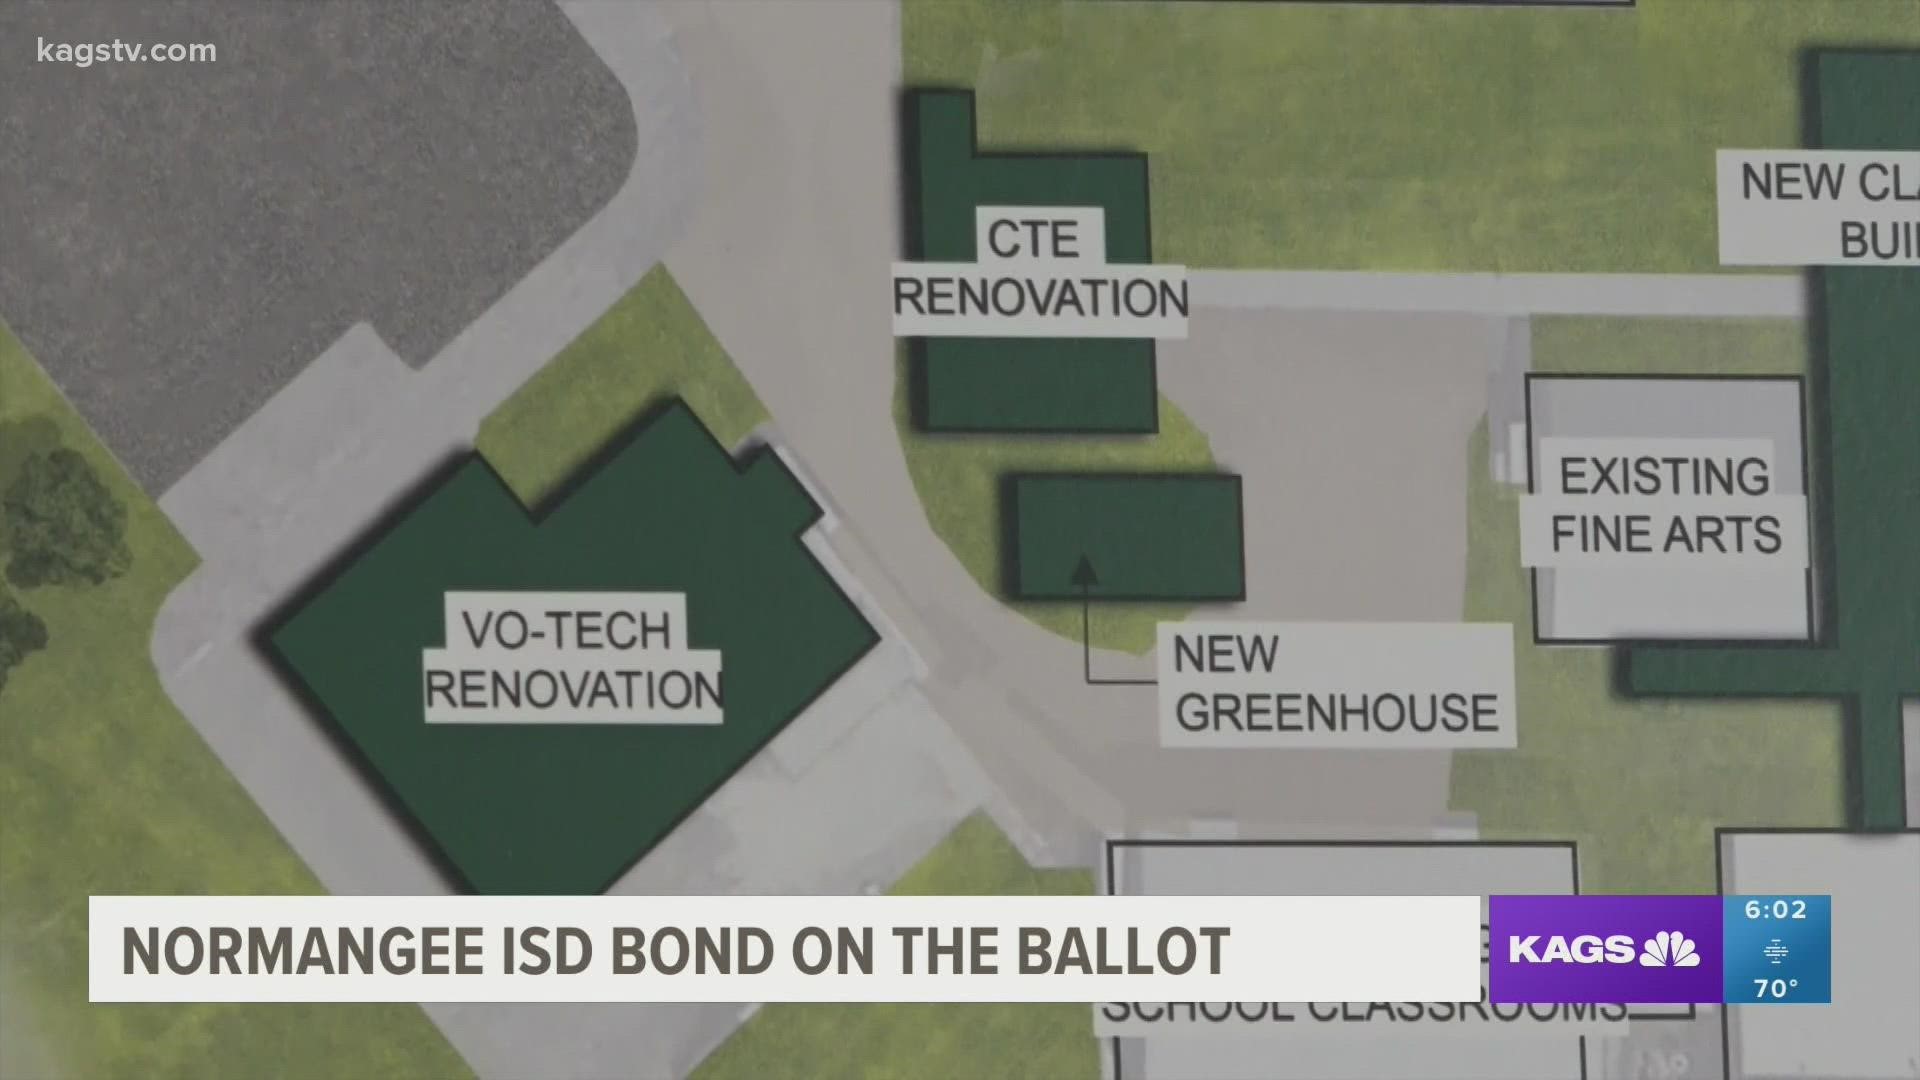 School officials said this bond is an important issue on Saturday's ballot.